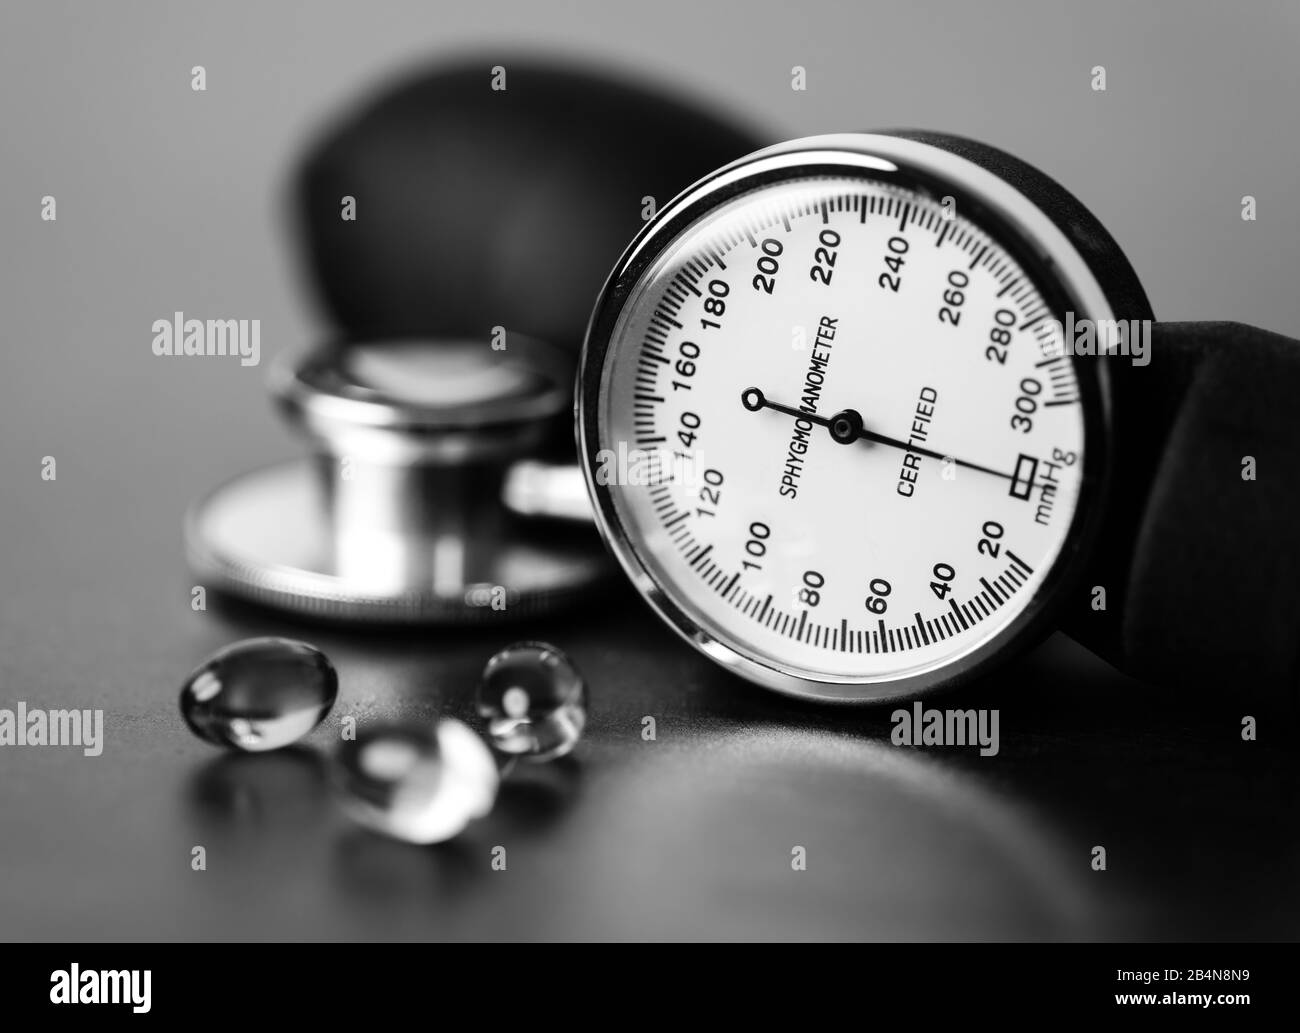 Health and blood pressure. Omega-3 capsules sitting alongside the gauge of a sphygmomanometer and head of a stethoscope. Stock Photo